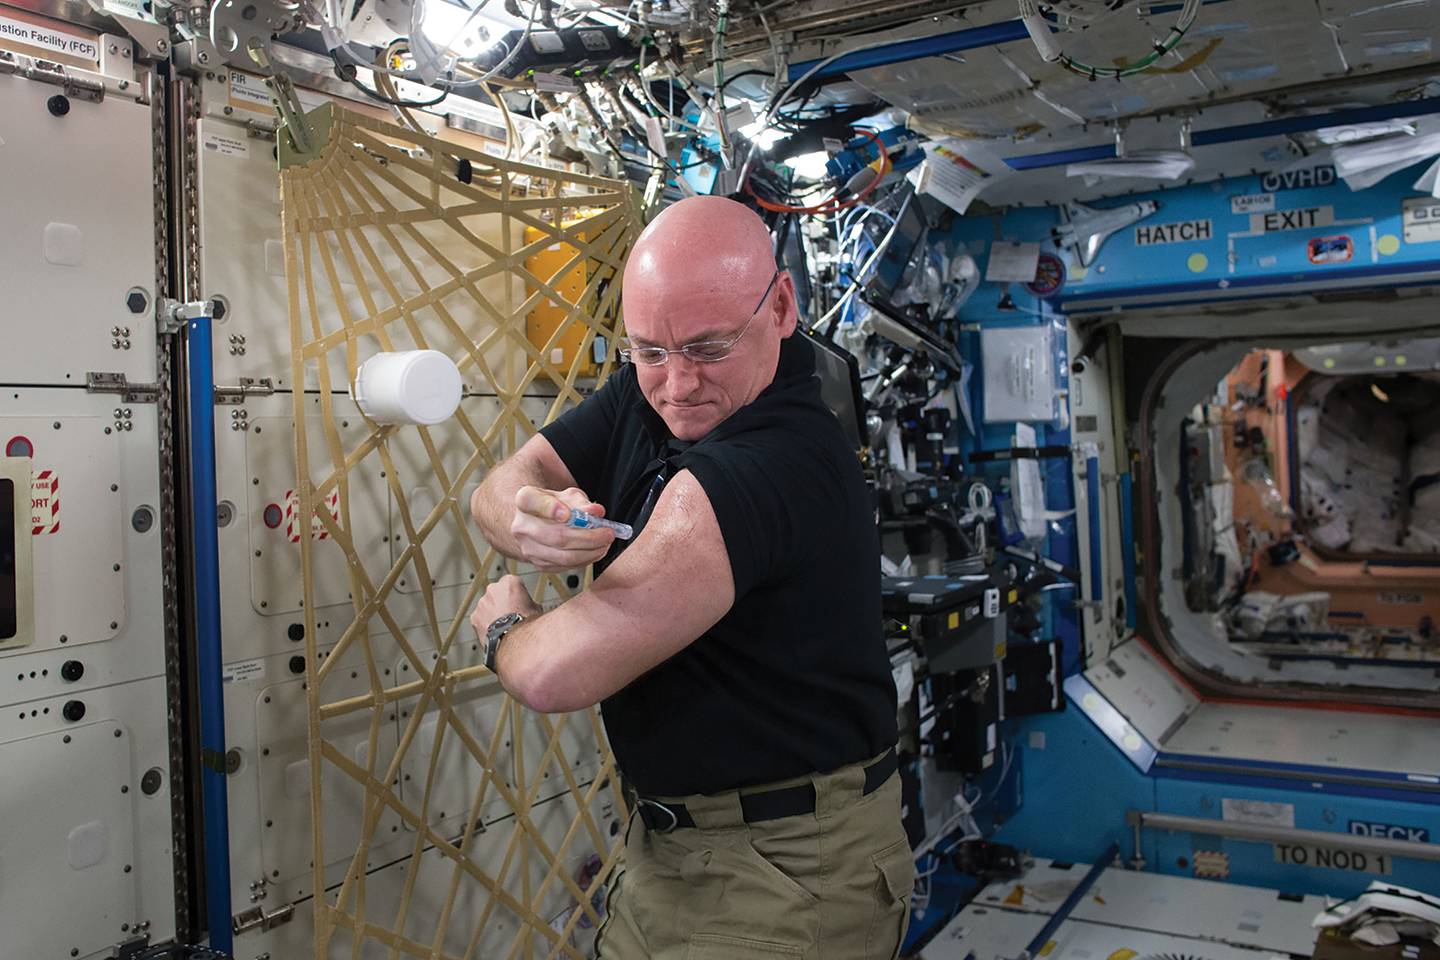 Astronaut Scott Kelly injects himself with a needle